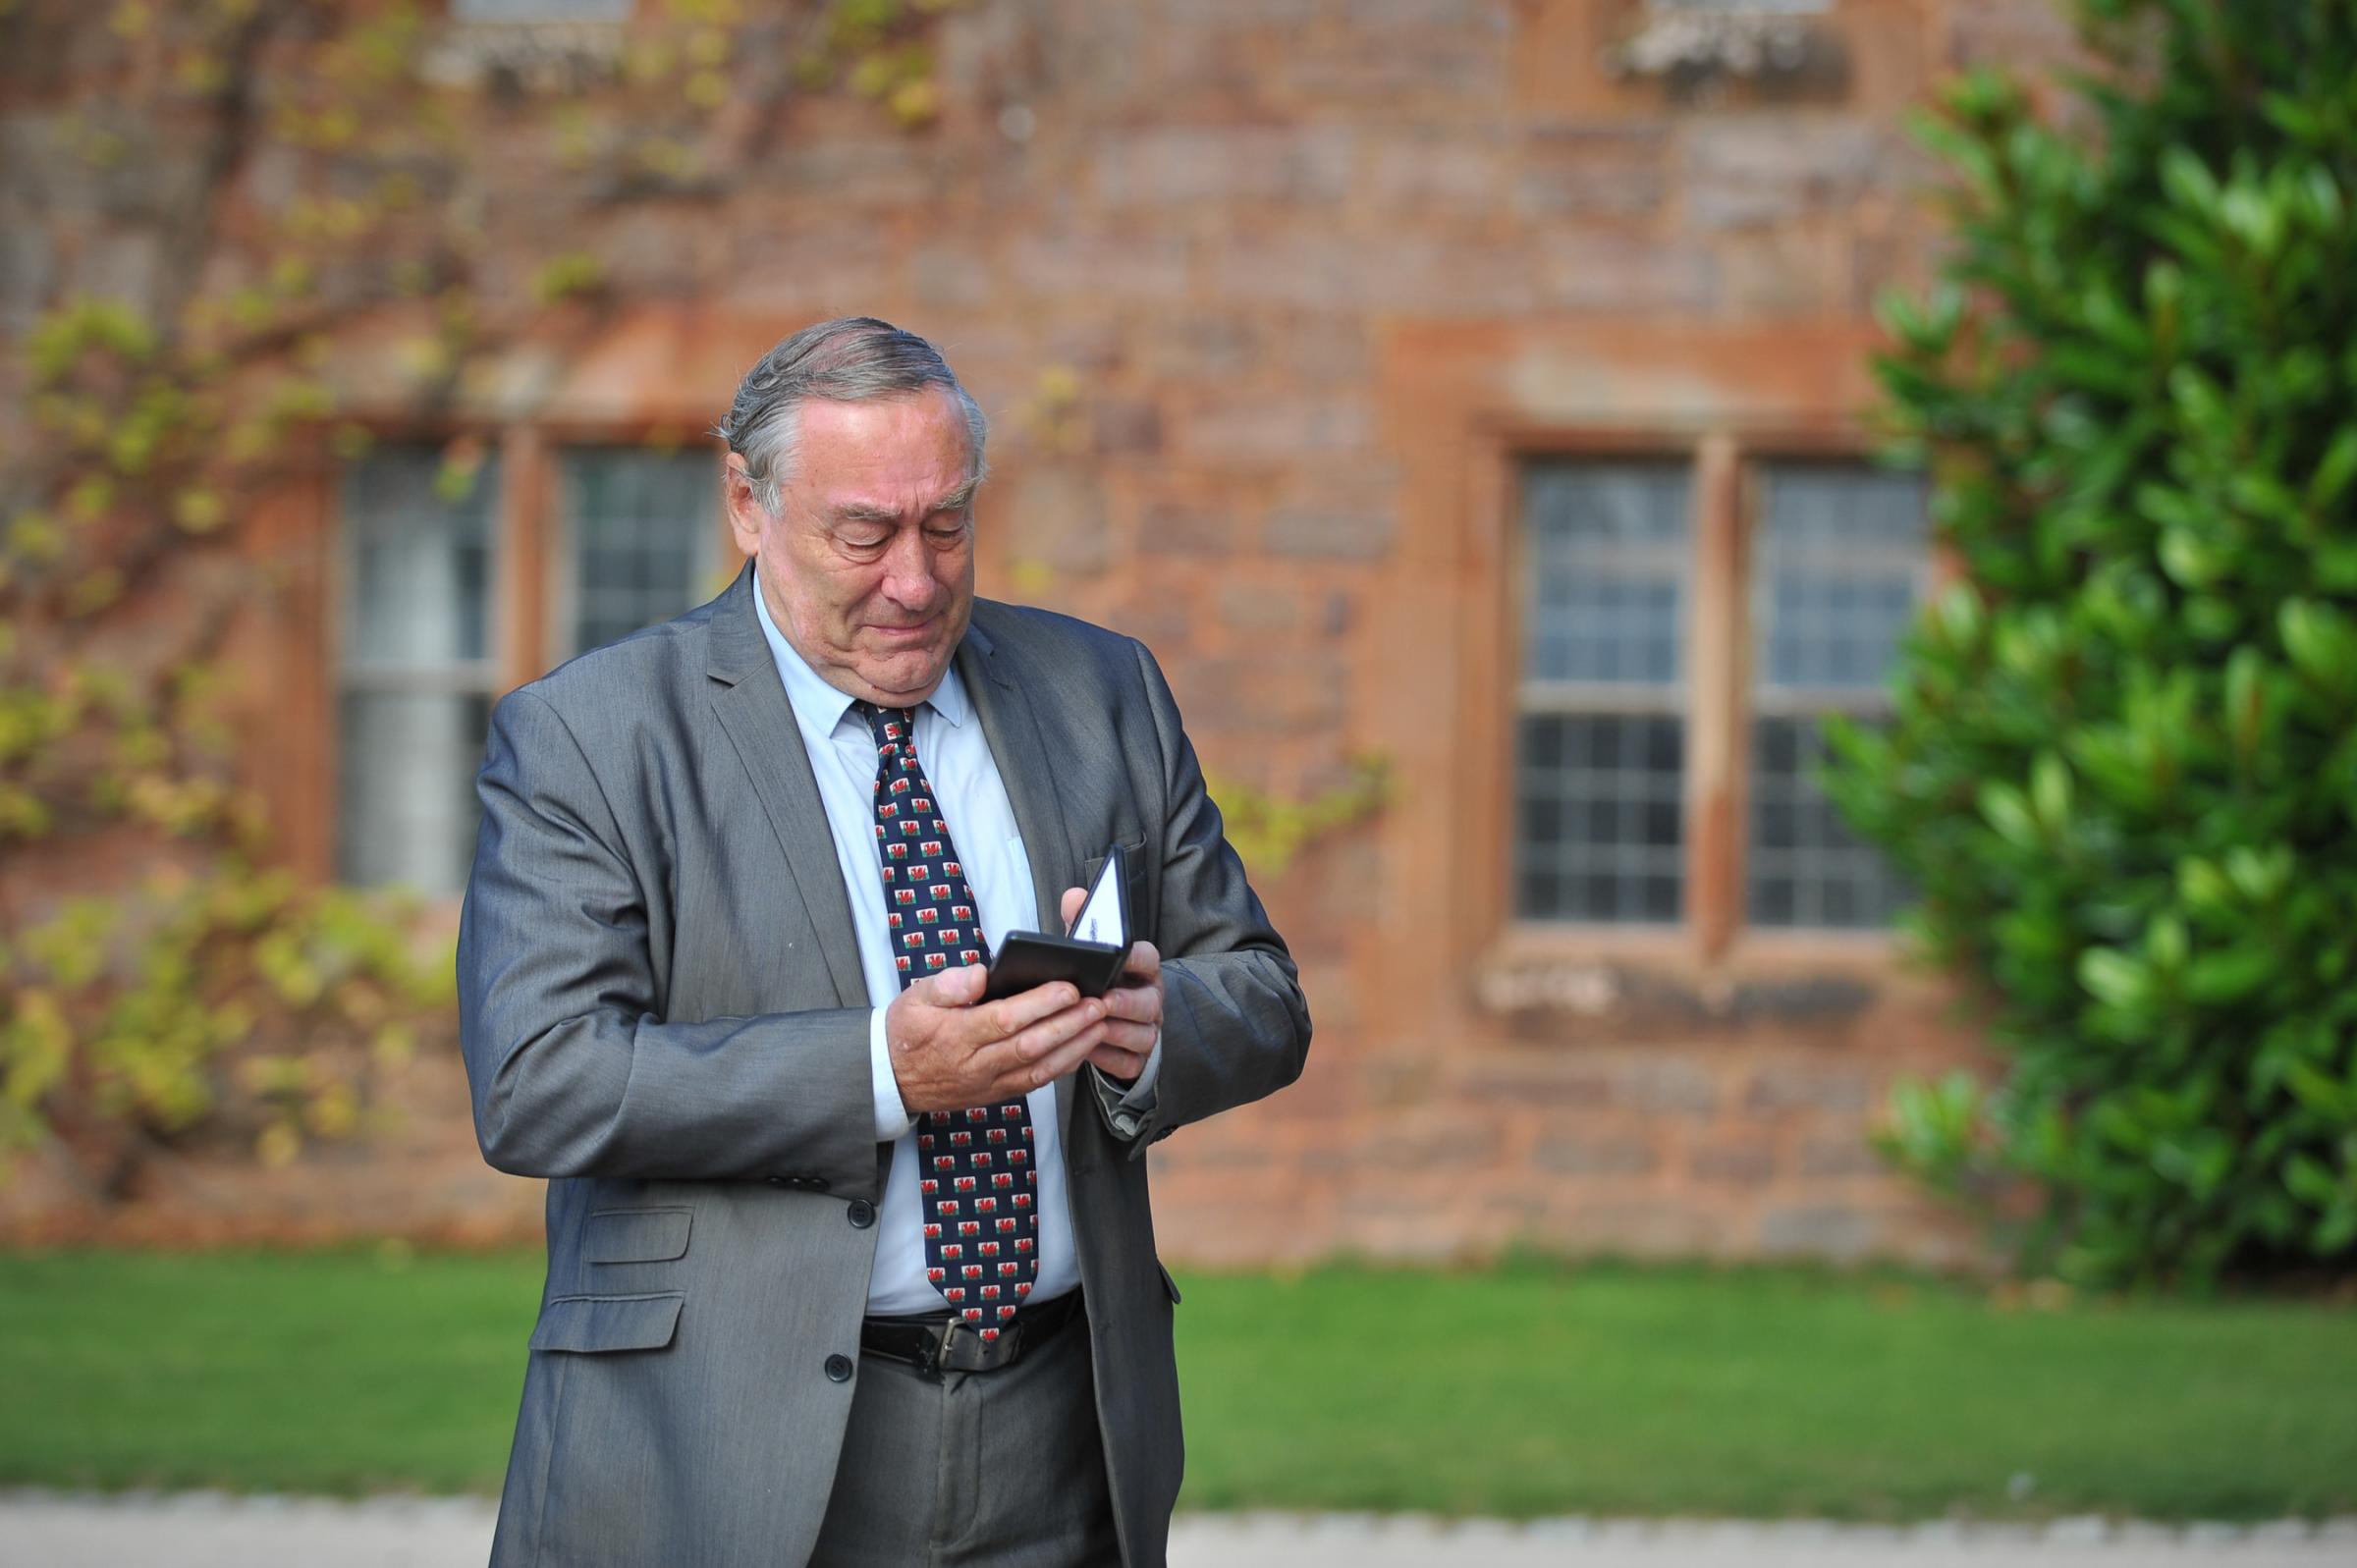 WELSHPOOL, WALES - Robert Robinson receives his MBE award at a presentation ceremony at Powis Castle (Mike Sheridan/County Times).